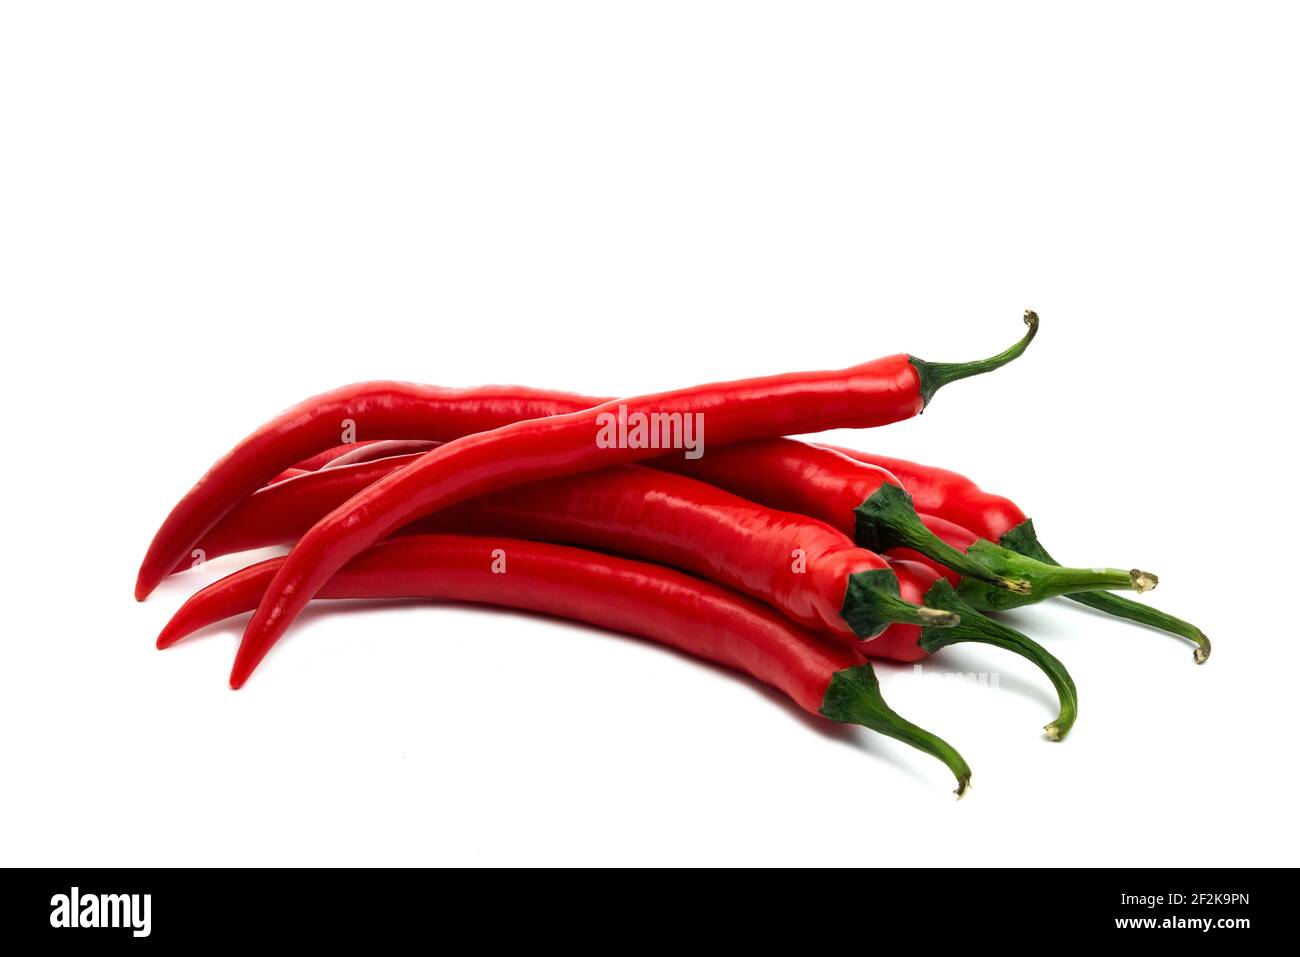 Red fresh chili peppers isolated on white background Stock Photo